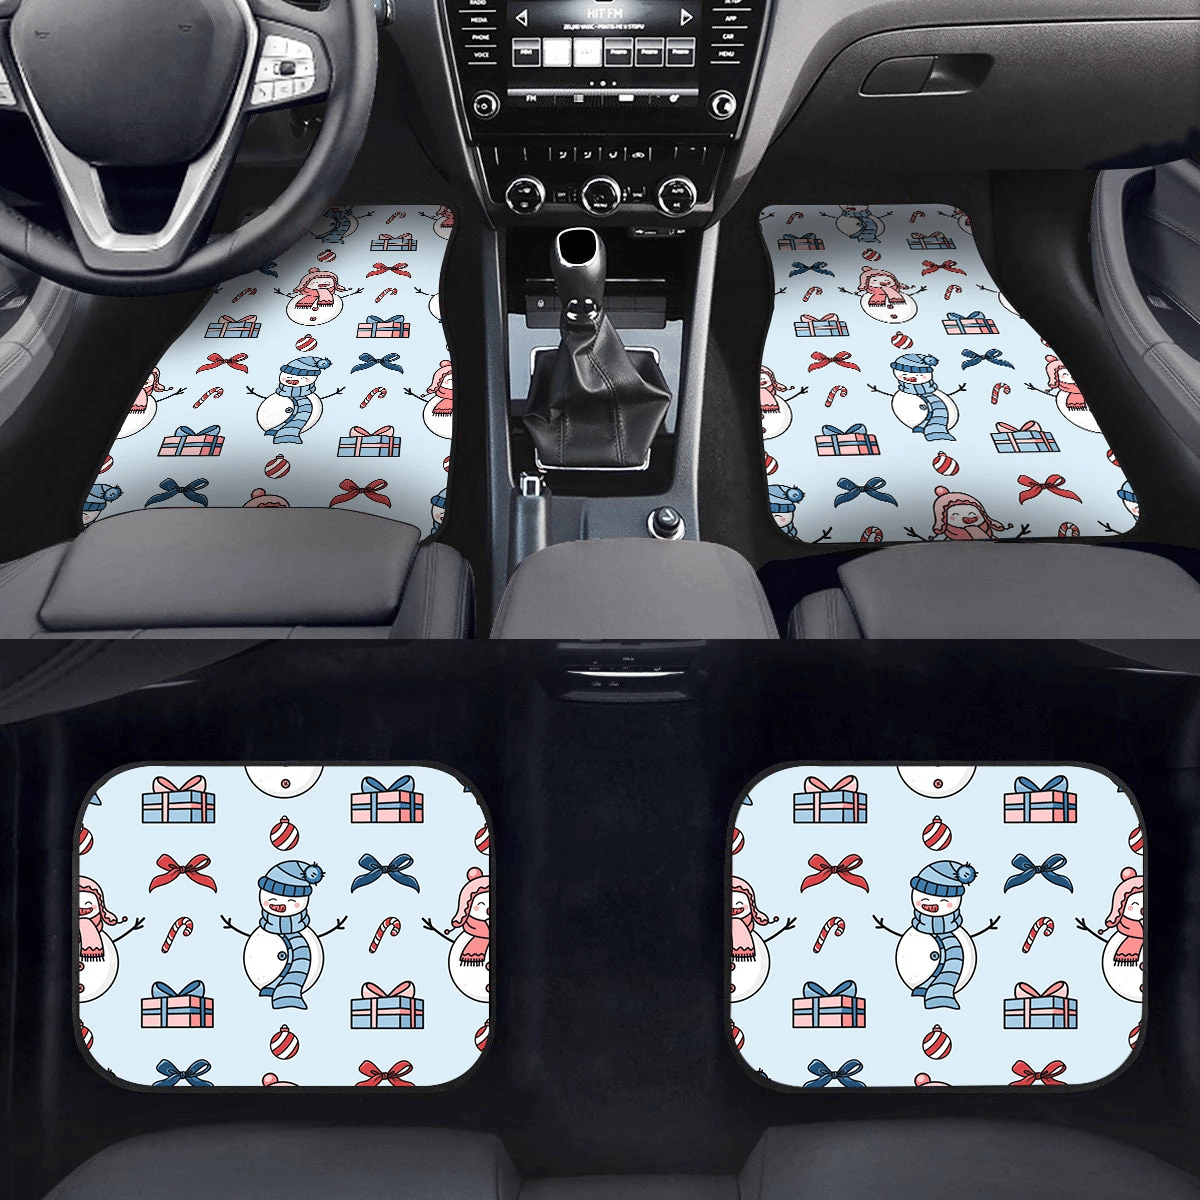 Candy Cane Gift And Christmas Snowman In Scarf Car Mats Car Floor Mats